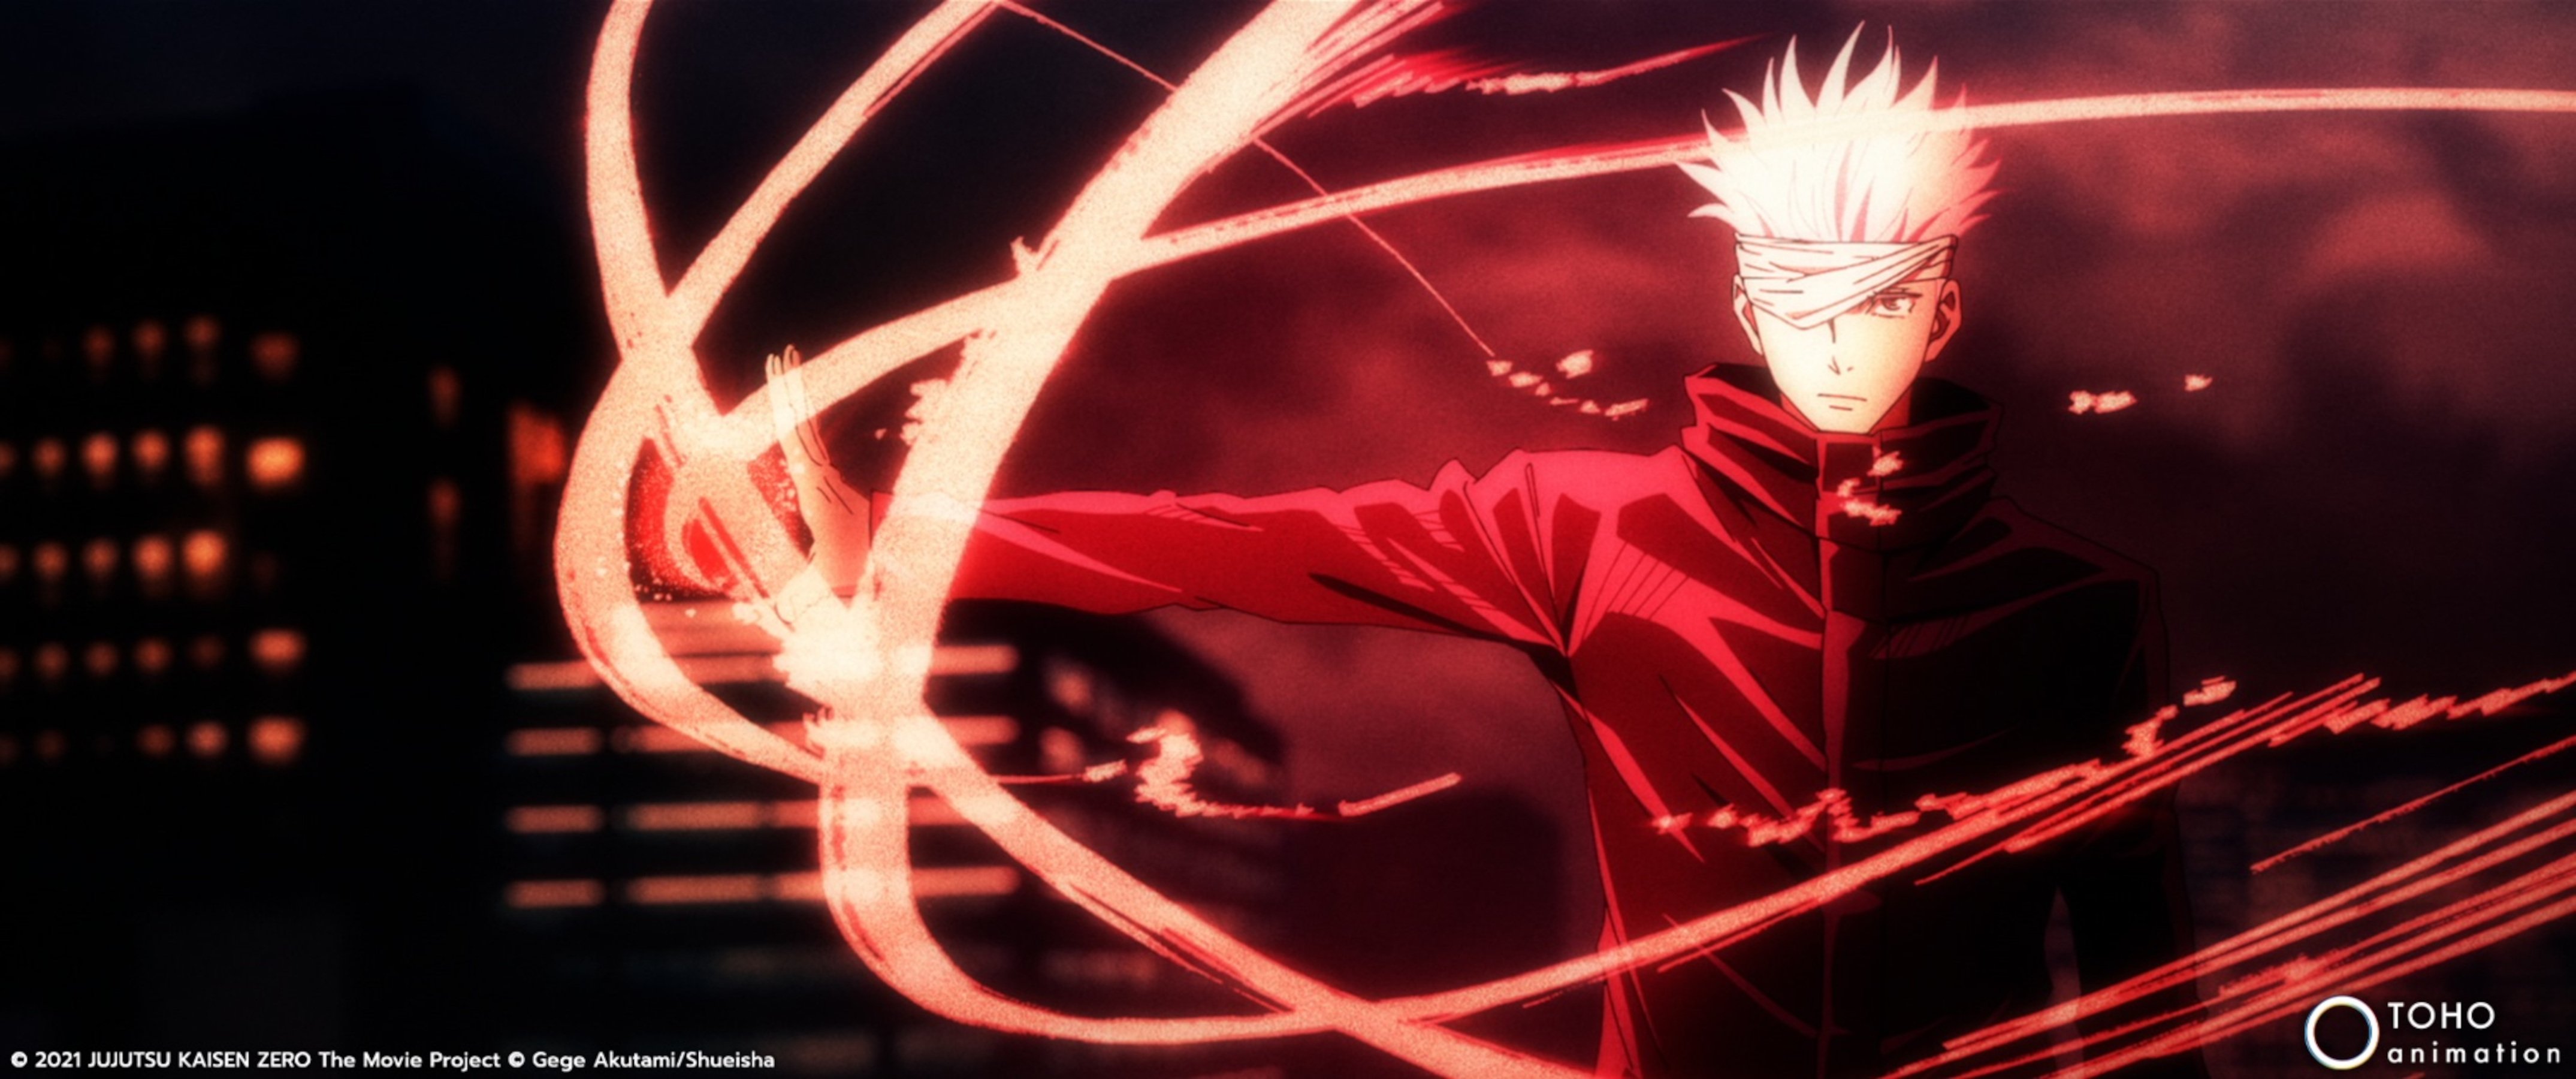 Satoru Gojo in 'Jujutsu Kaisen 0.' He's fighting and surrounded by red.